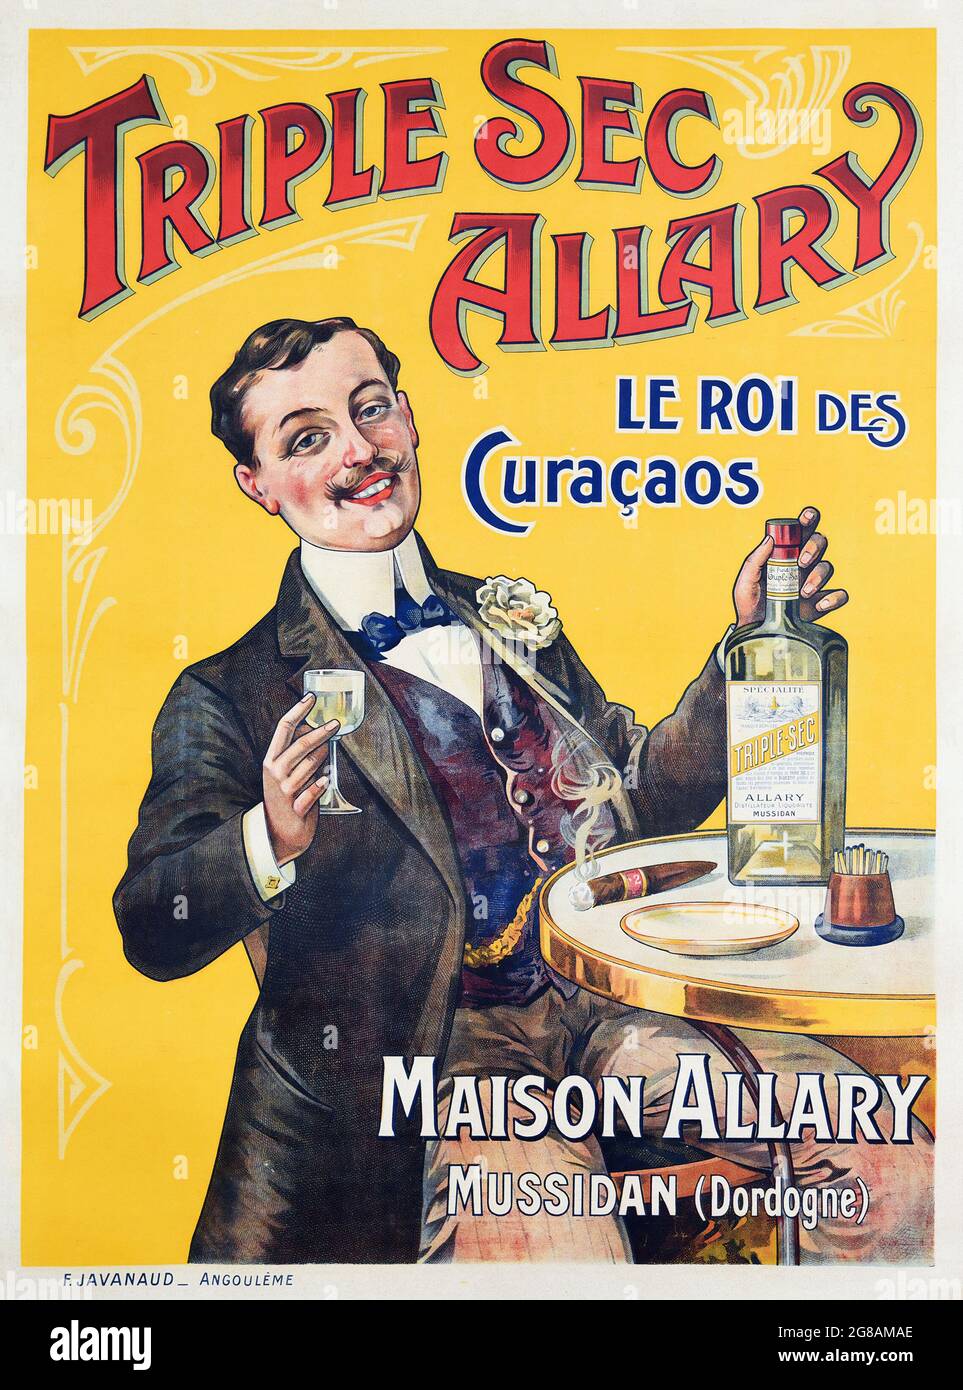 Vintage advertisement for Triple Sec Allary. Alcohol advertising. 'Le Roi des Curacaos'. Maison Allary Mussidan (Dordogne). Man sitting at a table. Stock Photo